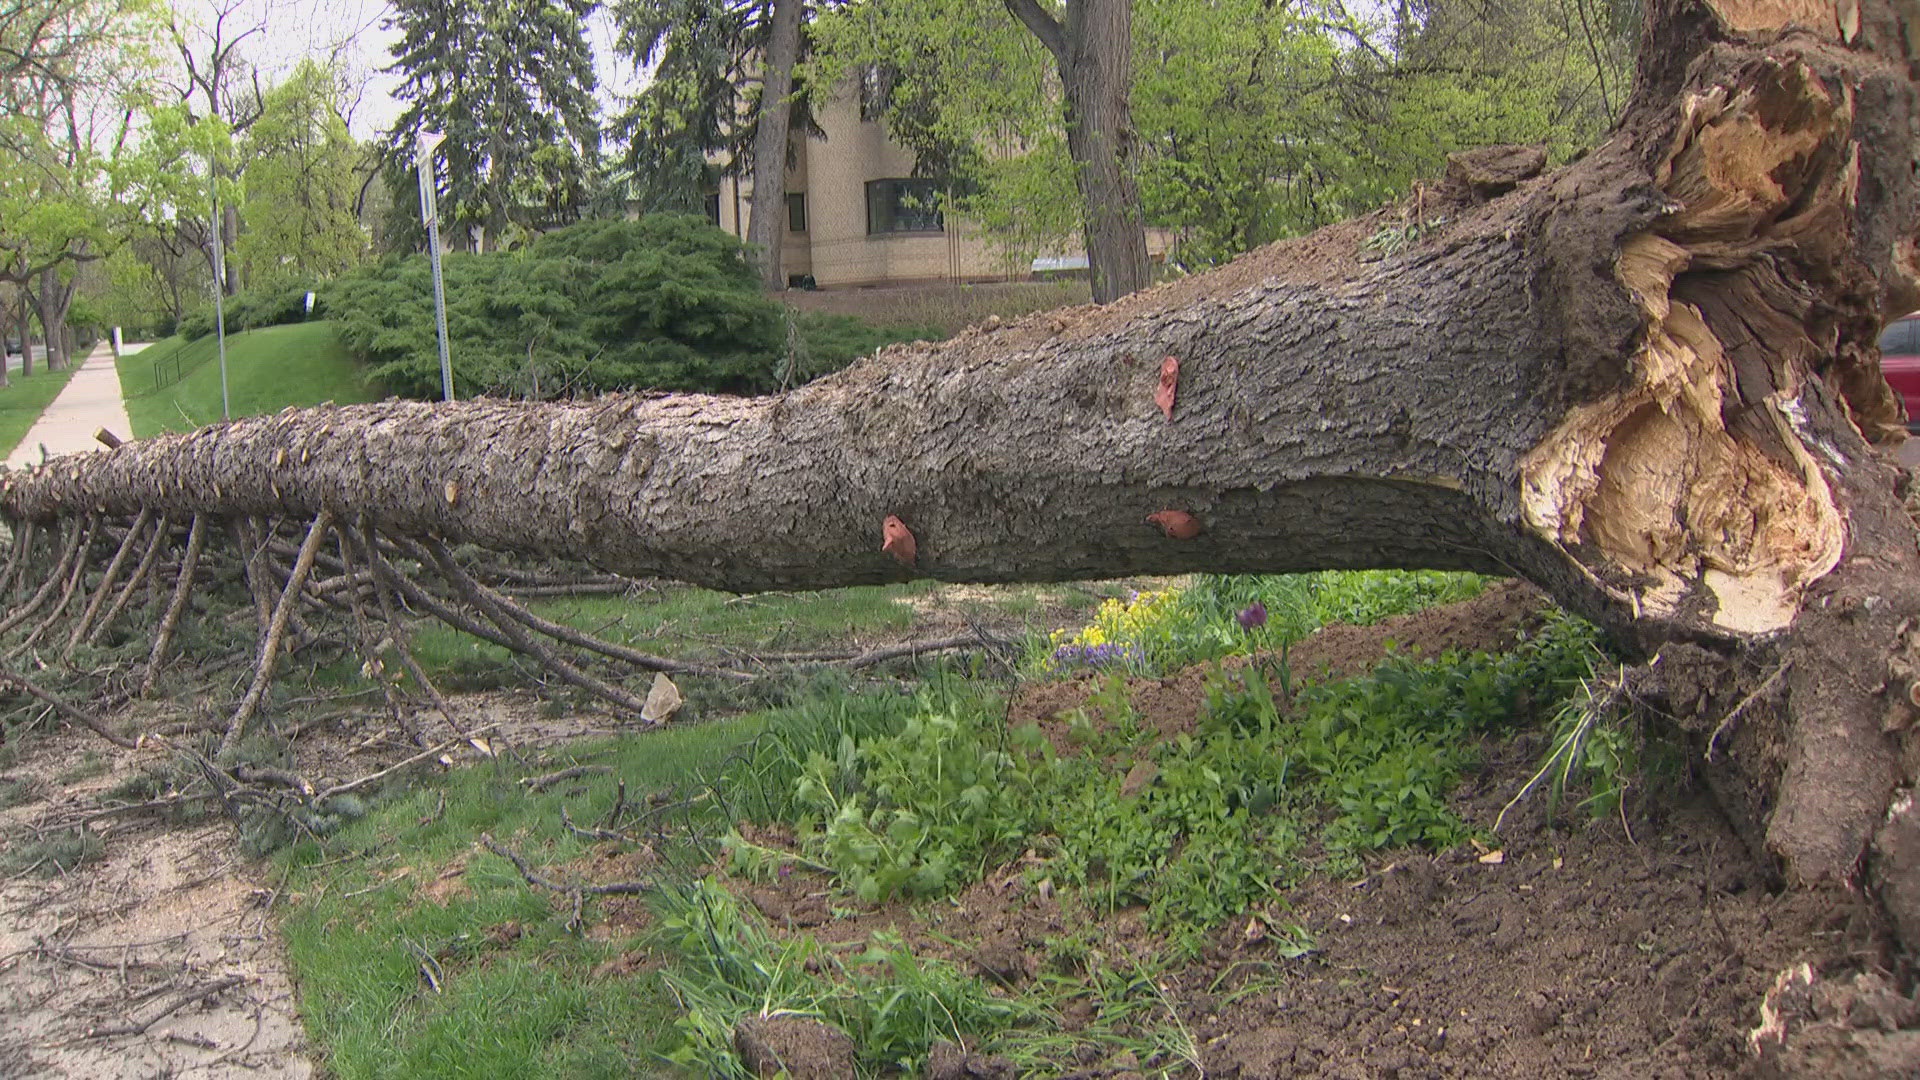 Homeowners Andy Parker and Anna Valentine-Parker got a call from their neighbor that a large pine came crashing down in their front yard Monday.